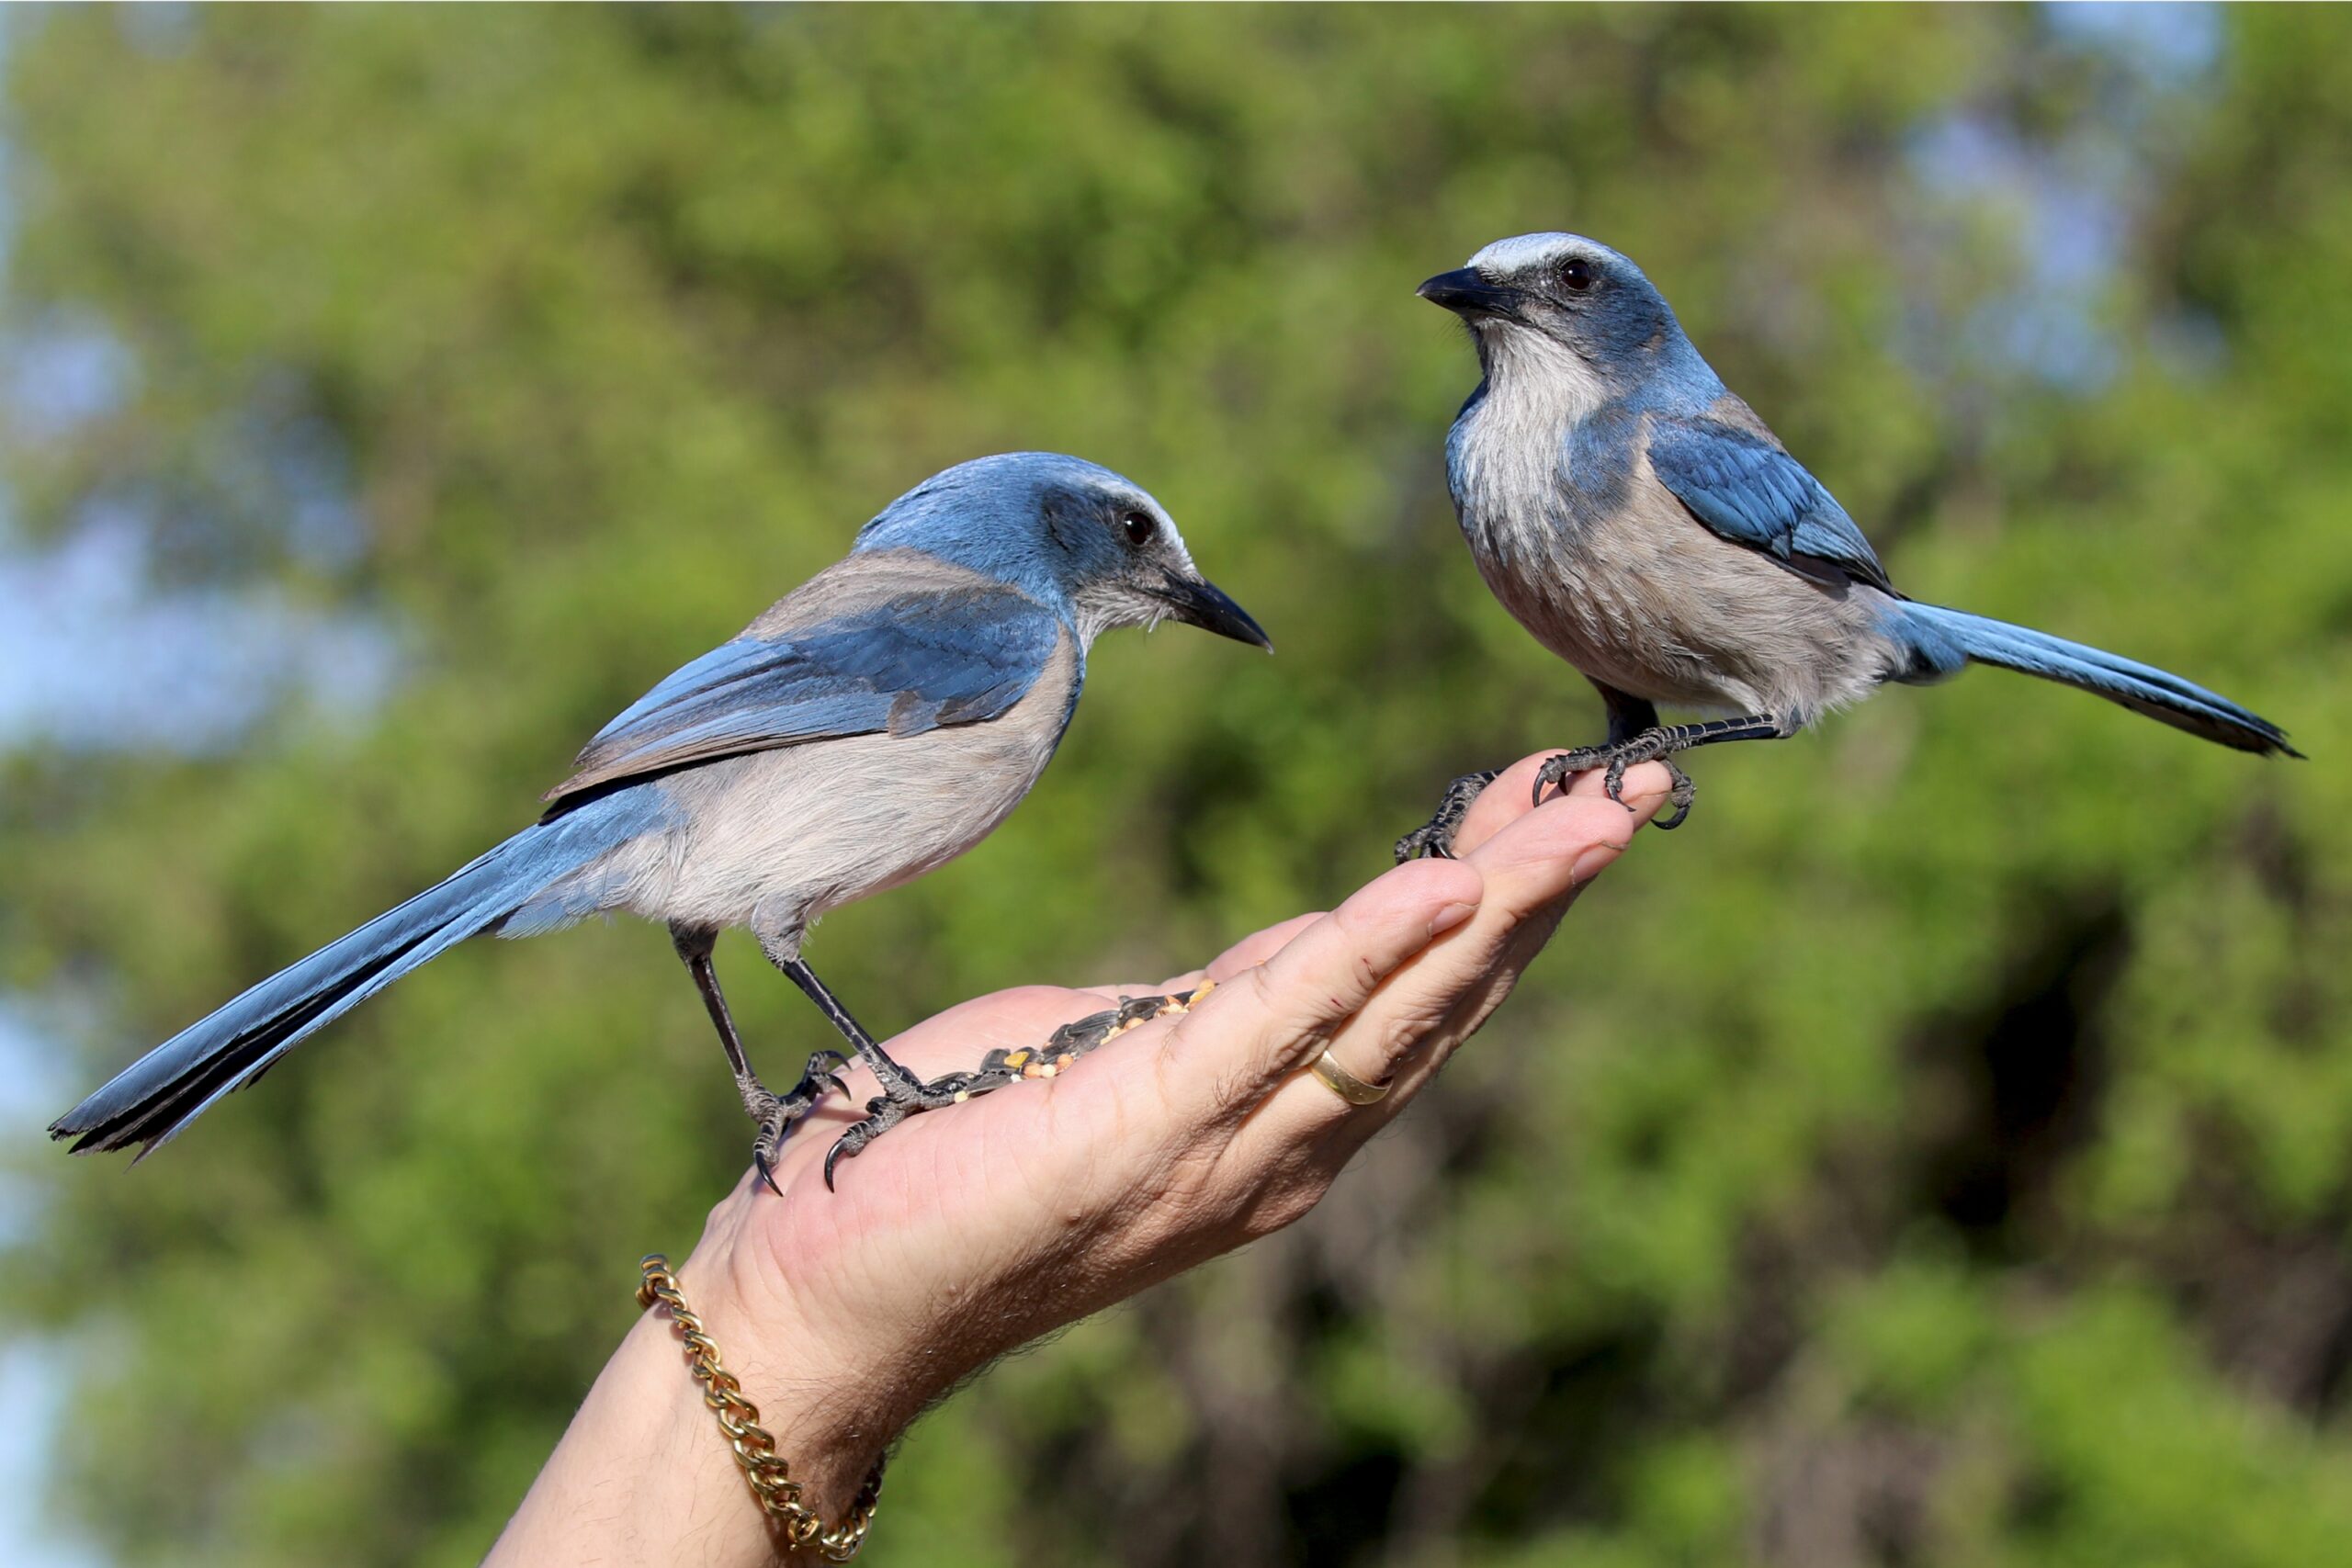 Two lovely blue jays in a person hand